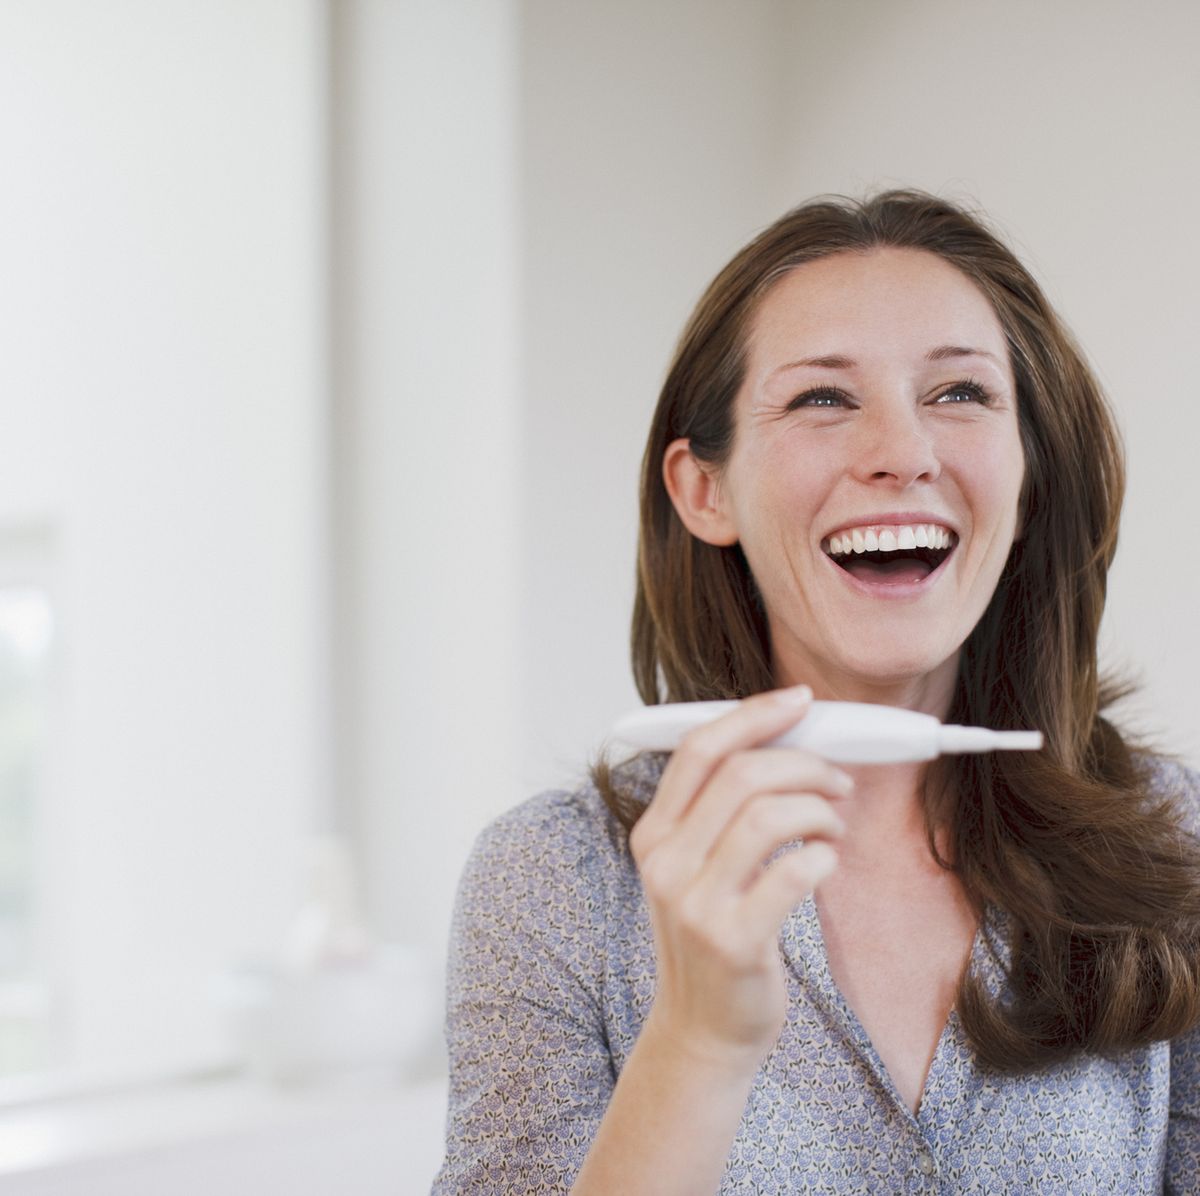 Getting Pregnant at 40: Chances of getting pregnant naturally